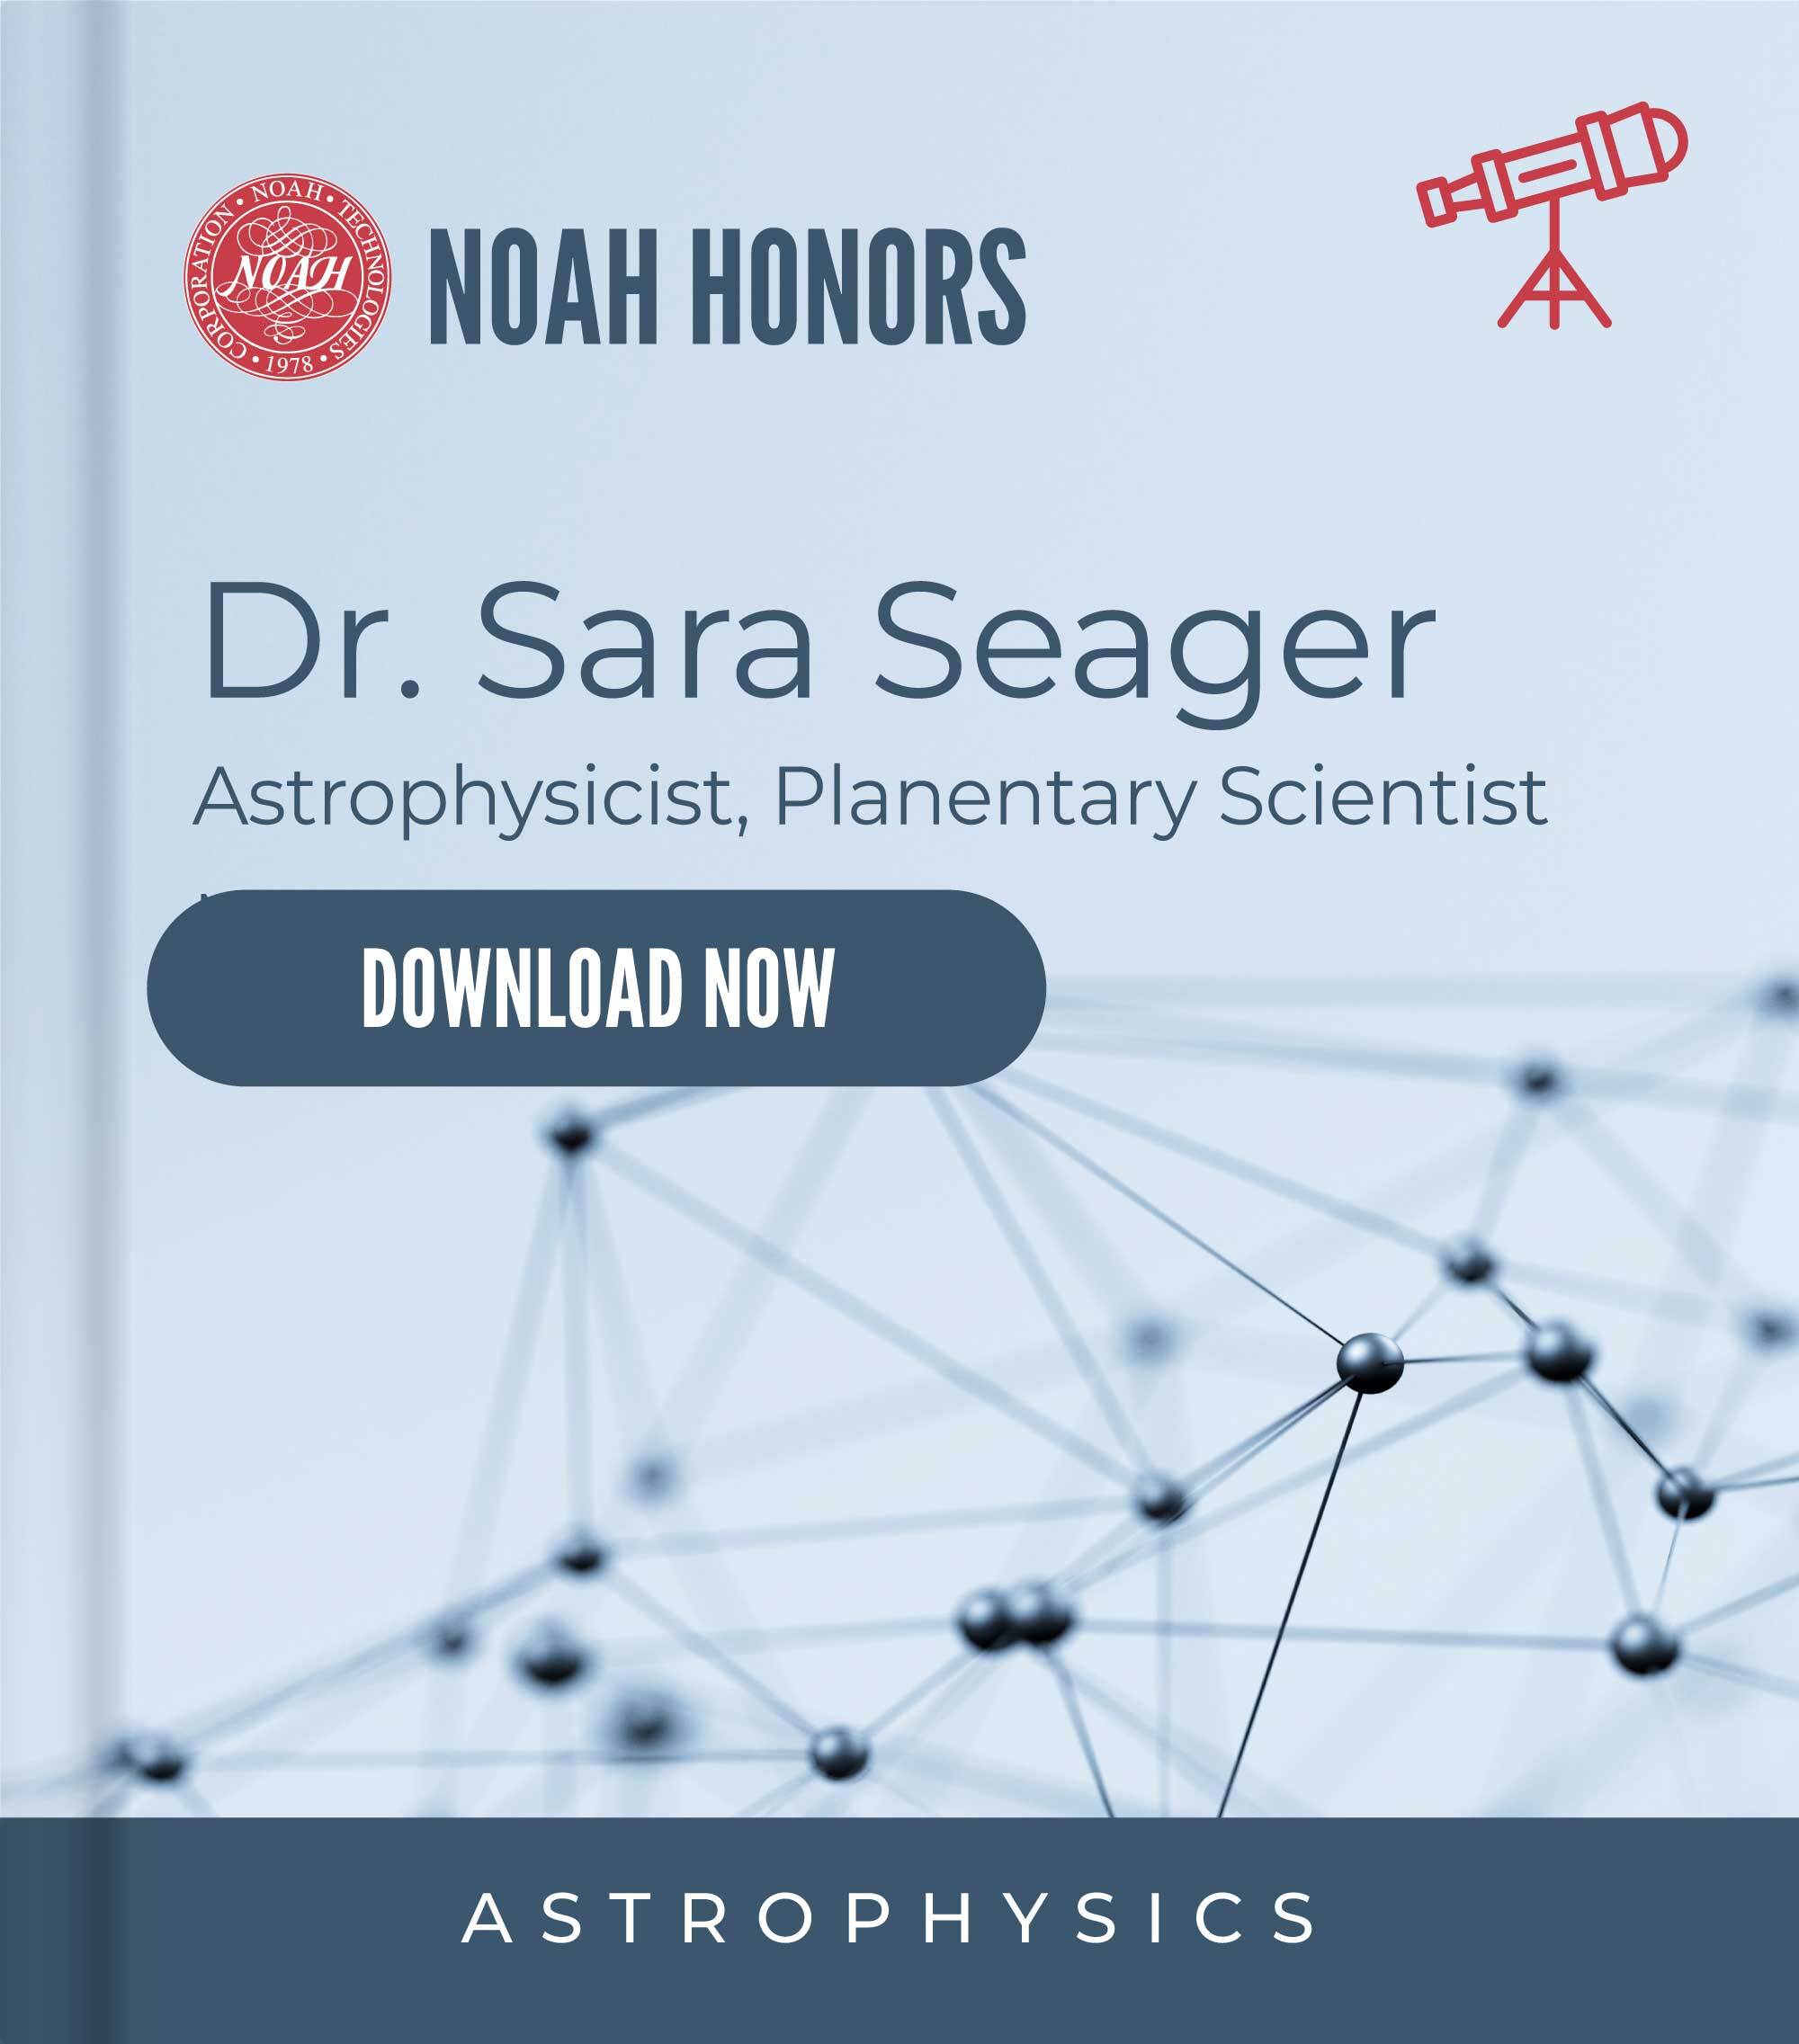 Noah honors Dr. Sara Seager cover graphic to download white paper now